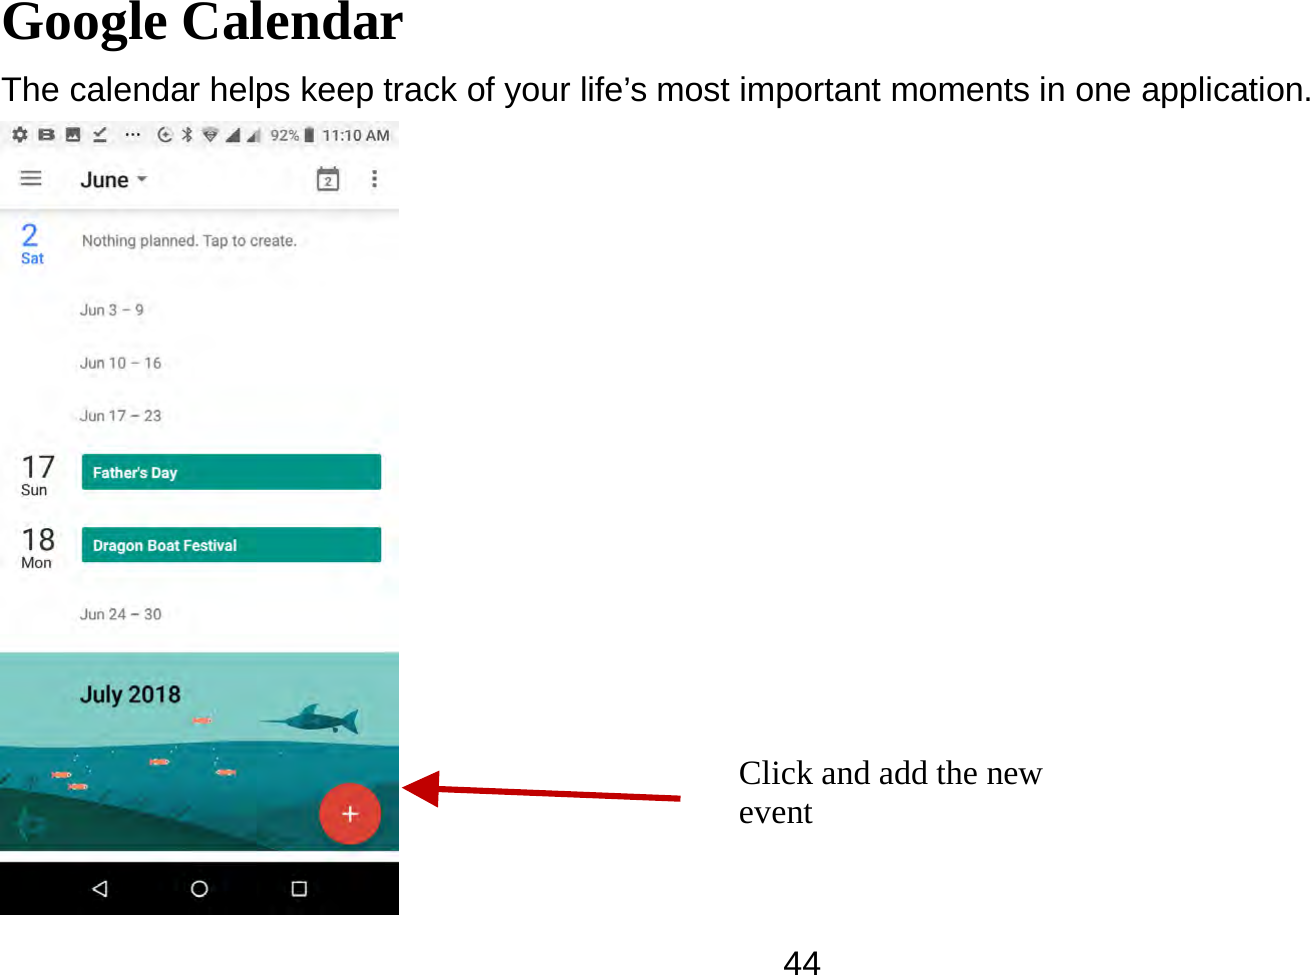   44Google Calendar The calendar helps keep track of your life’s most important moments in one application.    Click and add the new event   